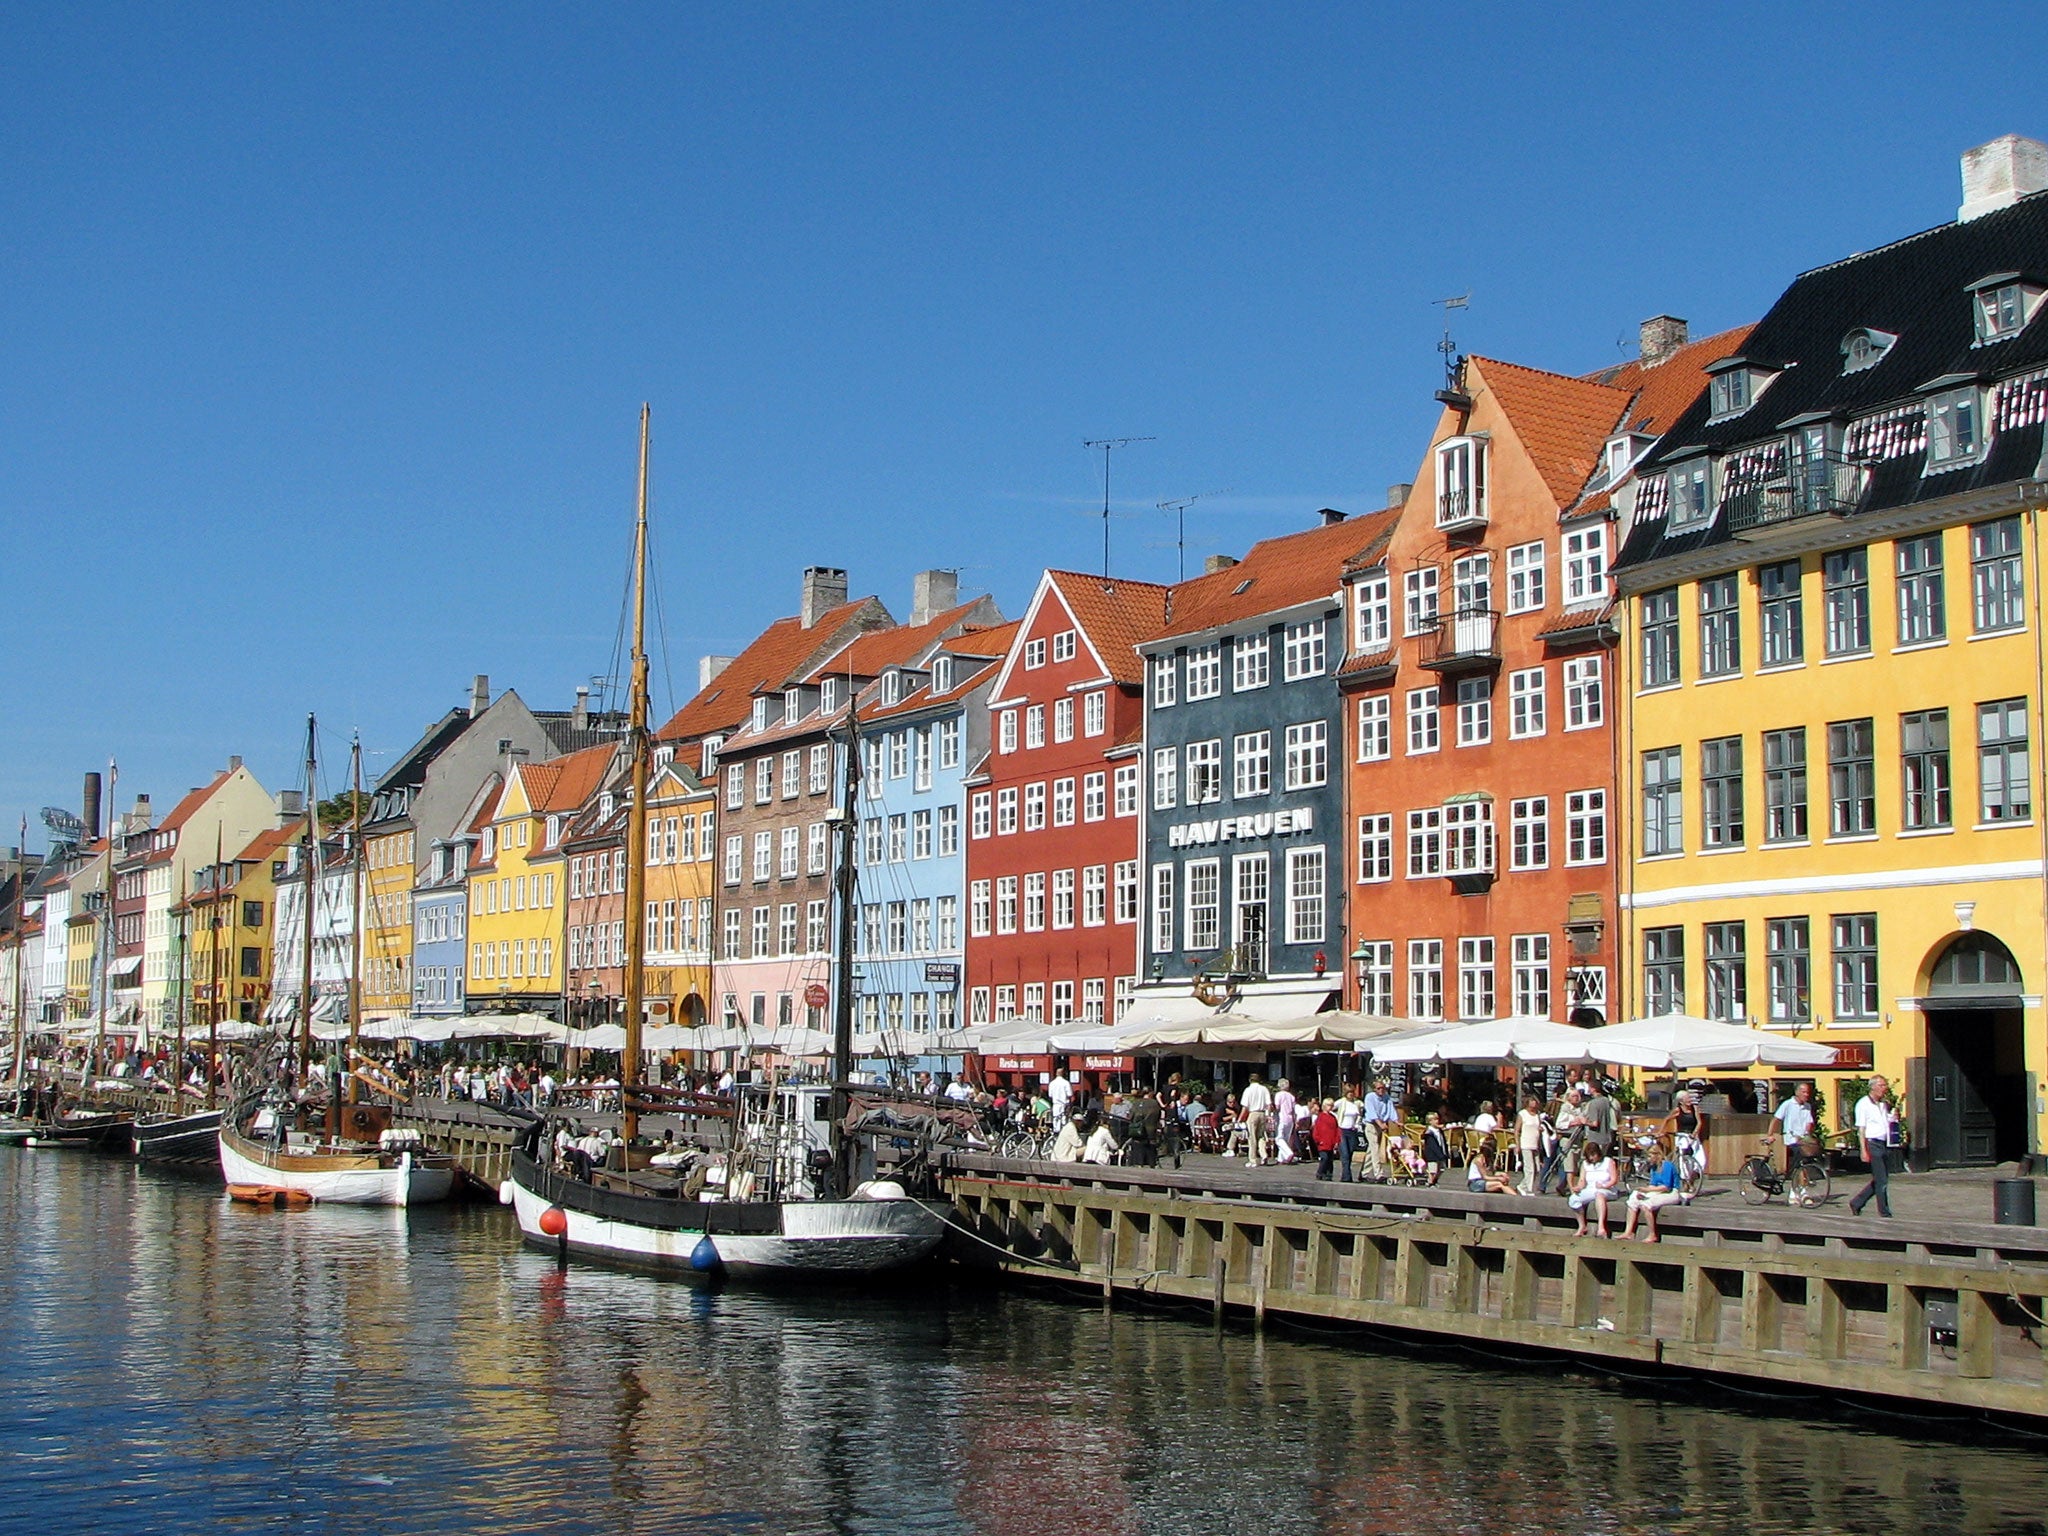 Copenhagen in Denmark, one of the most happiest countries in the EU